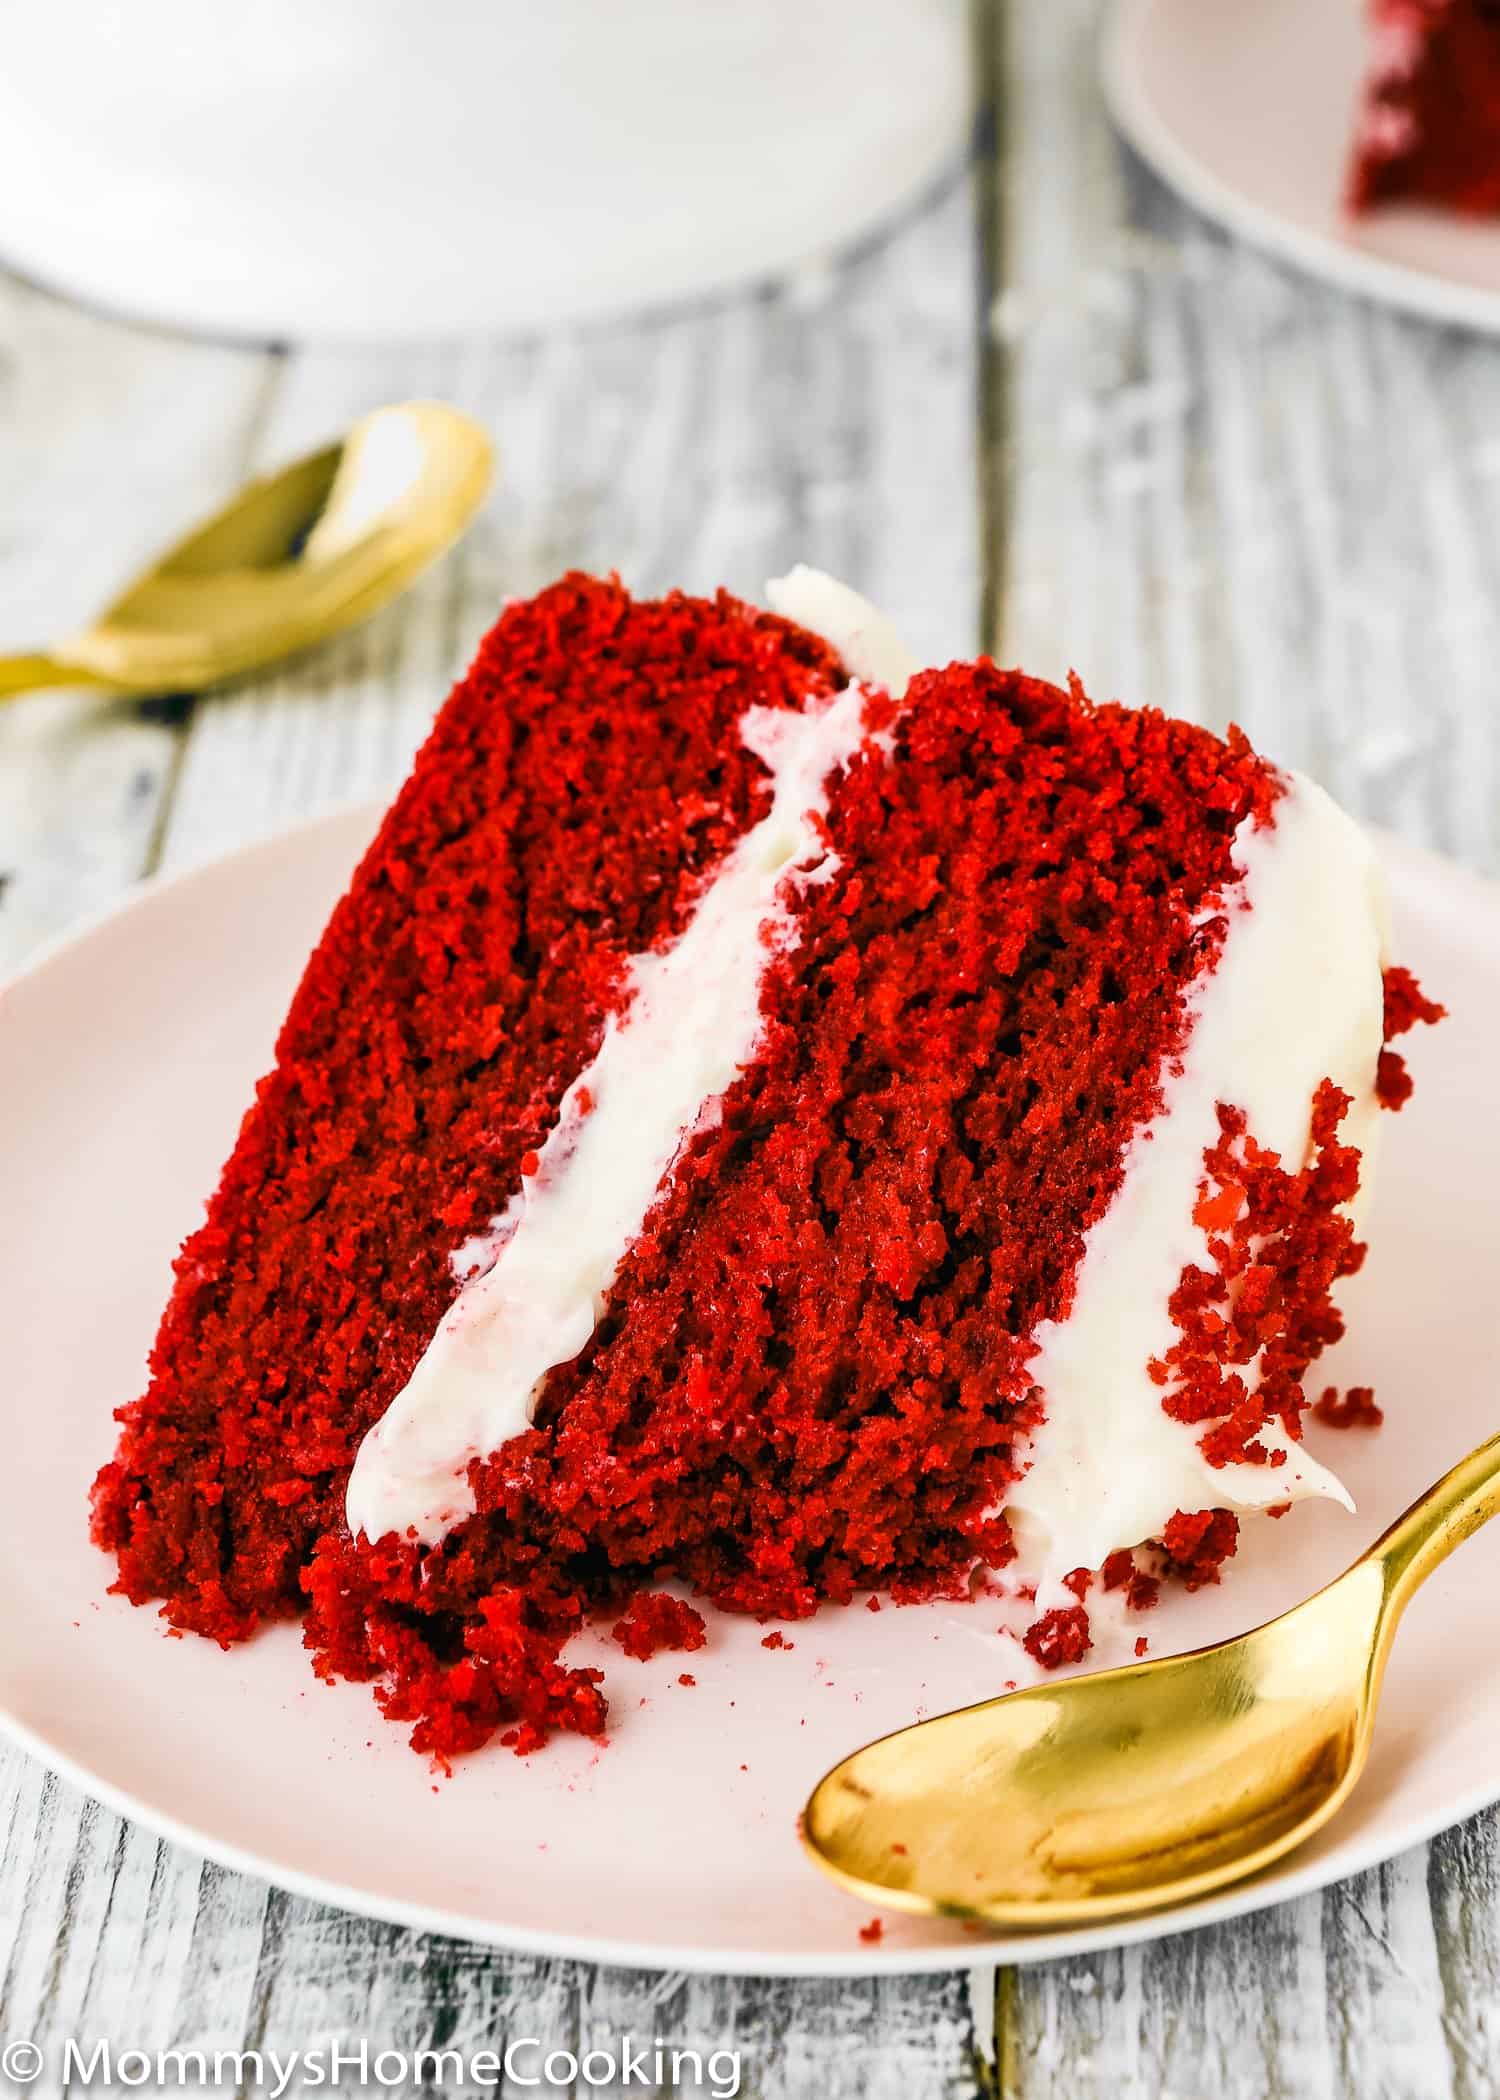 This Eggless Red Velvet Cake is moist, rich, and amazingly tasty! Two lovely layers of tender vibrant sponge red cake with fluffy cream cheese frosting. I promise you will not miss the eggs.  This easy dessert is the perfect showstopper for any occasion. https://mommyshomecooking.com